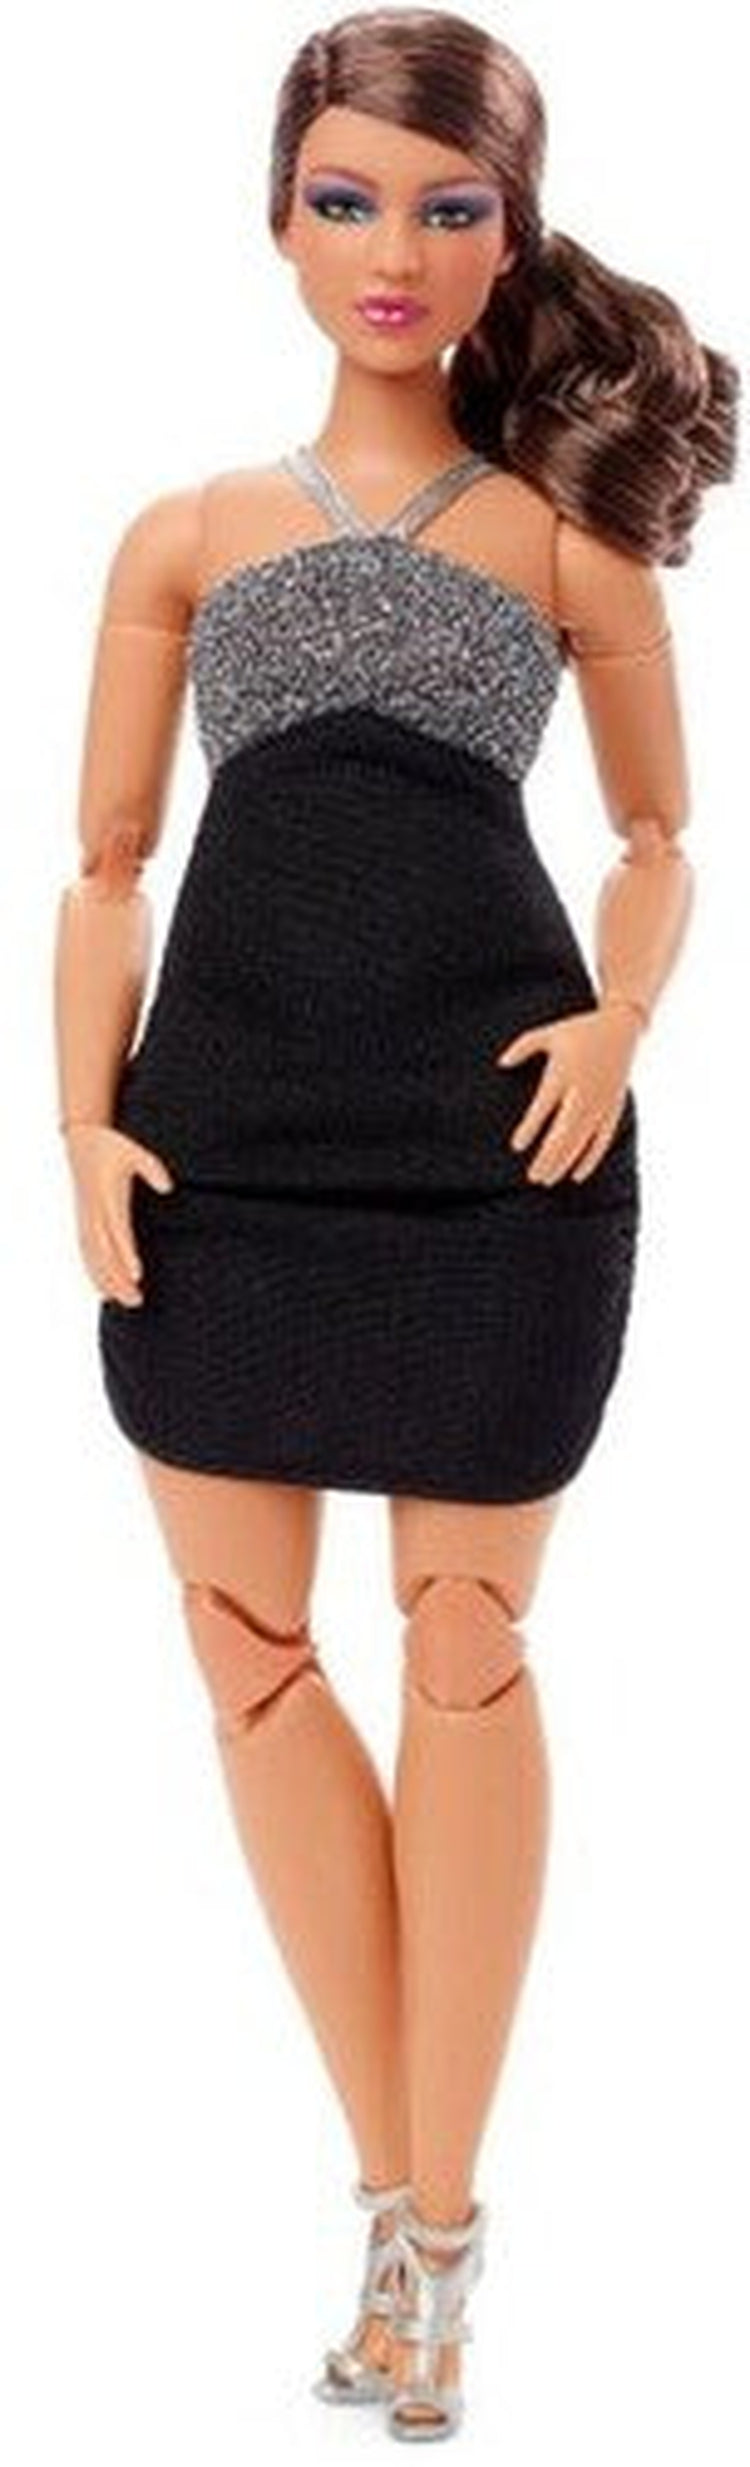 Mattel - Barbie Looks Doll with Black and Silver Mini Dress, Brunette with Side Pony